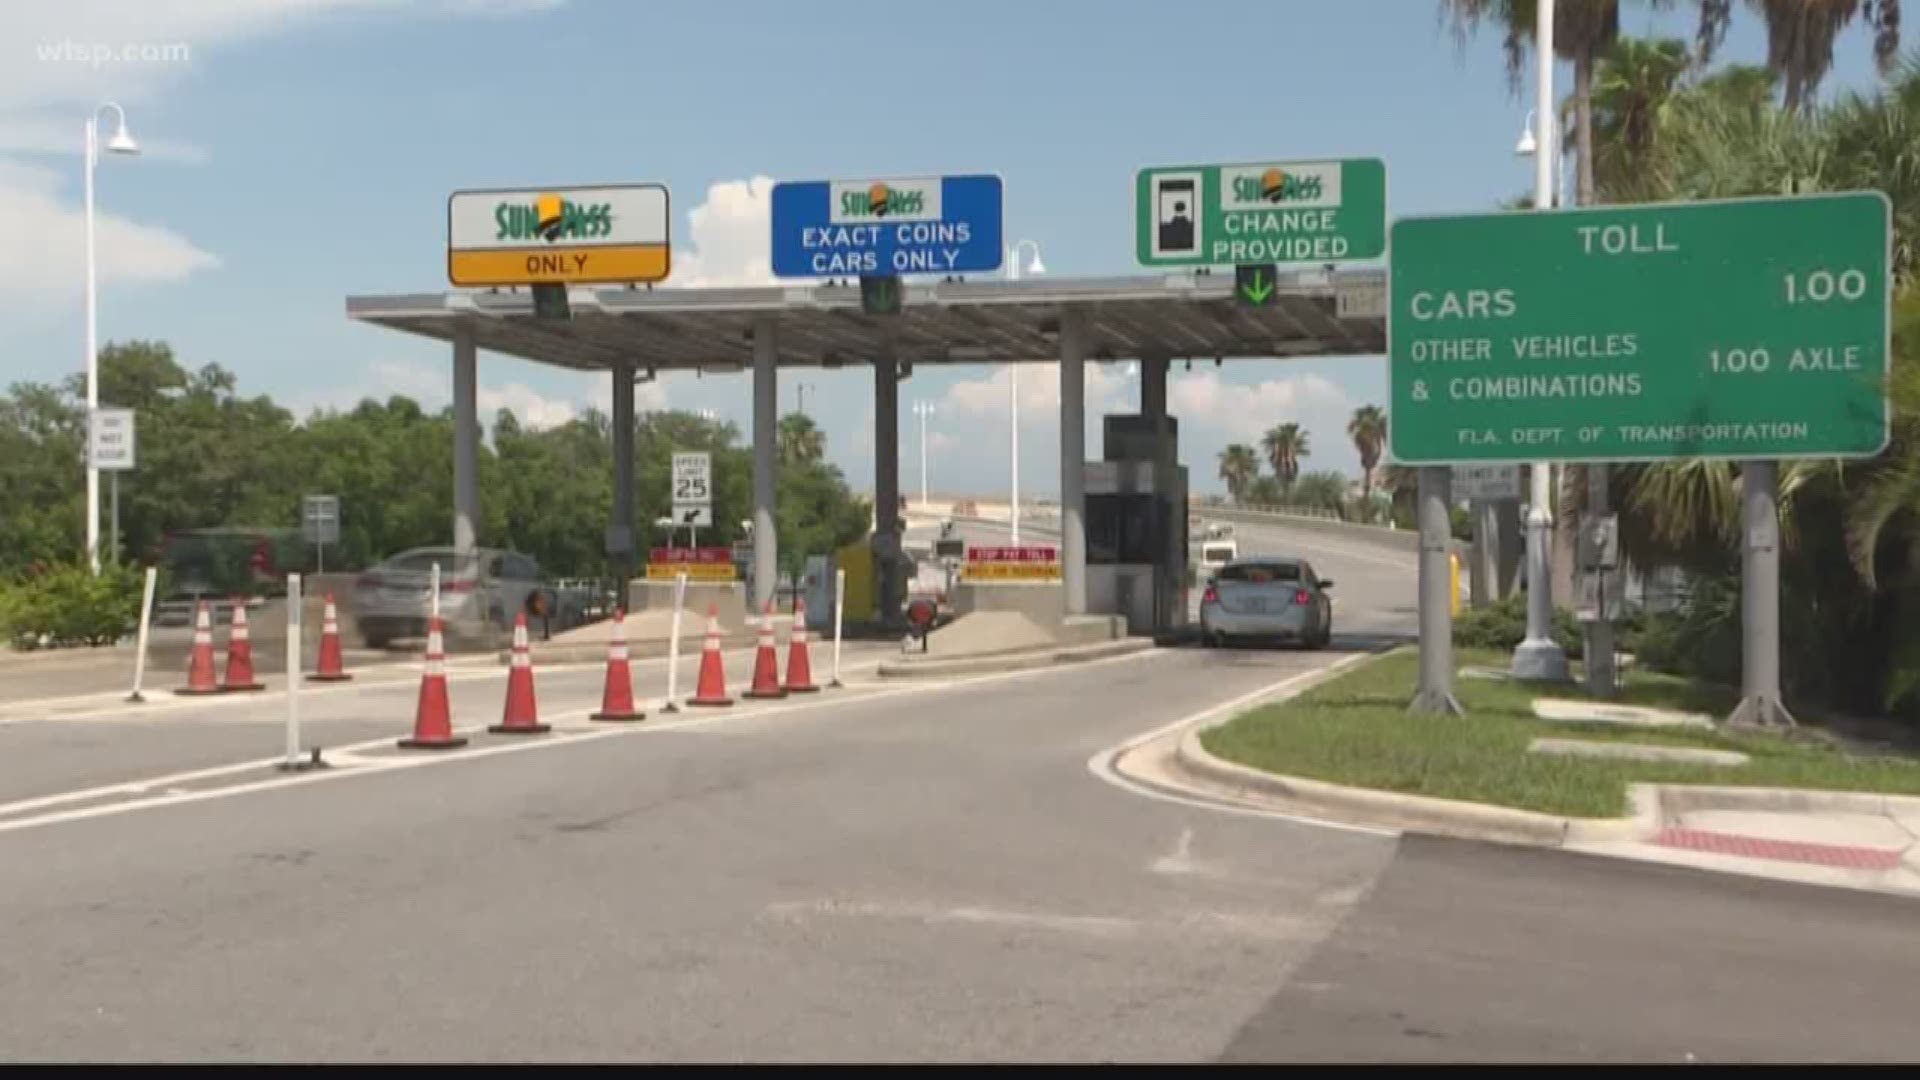 Florida will not renew its contract with the company behind the SunPass tolling system takeover disaster that has now caused more than a year's worth of problems, an FDOT spokesperson confirmed Wednesday to 10News.

In an interview earlier in the day, Transportation Secretary Kevin Thibault told the Tampa Bay Times the state would instead re-bid the second half of Conduent's 14-year agreement. As 10Investigates has previously exposed, the state chose not to run its old system in parallel with the new system that was launched in June 2018. That meant when the new system didn't work properly, there wasn't a backup.

That led to millions of backed-up toll transactions and an inspector general investigation. The Florida Department of Transporation has already imposed the maximum penalties, about $8.3 million, against Conduent for the tolling system meltdown.